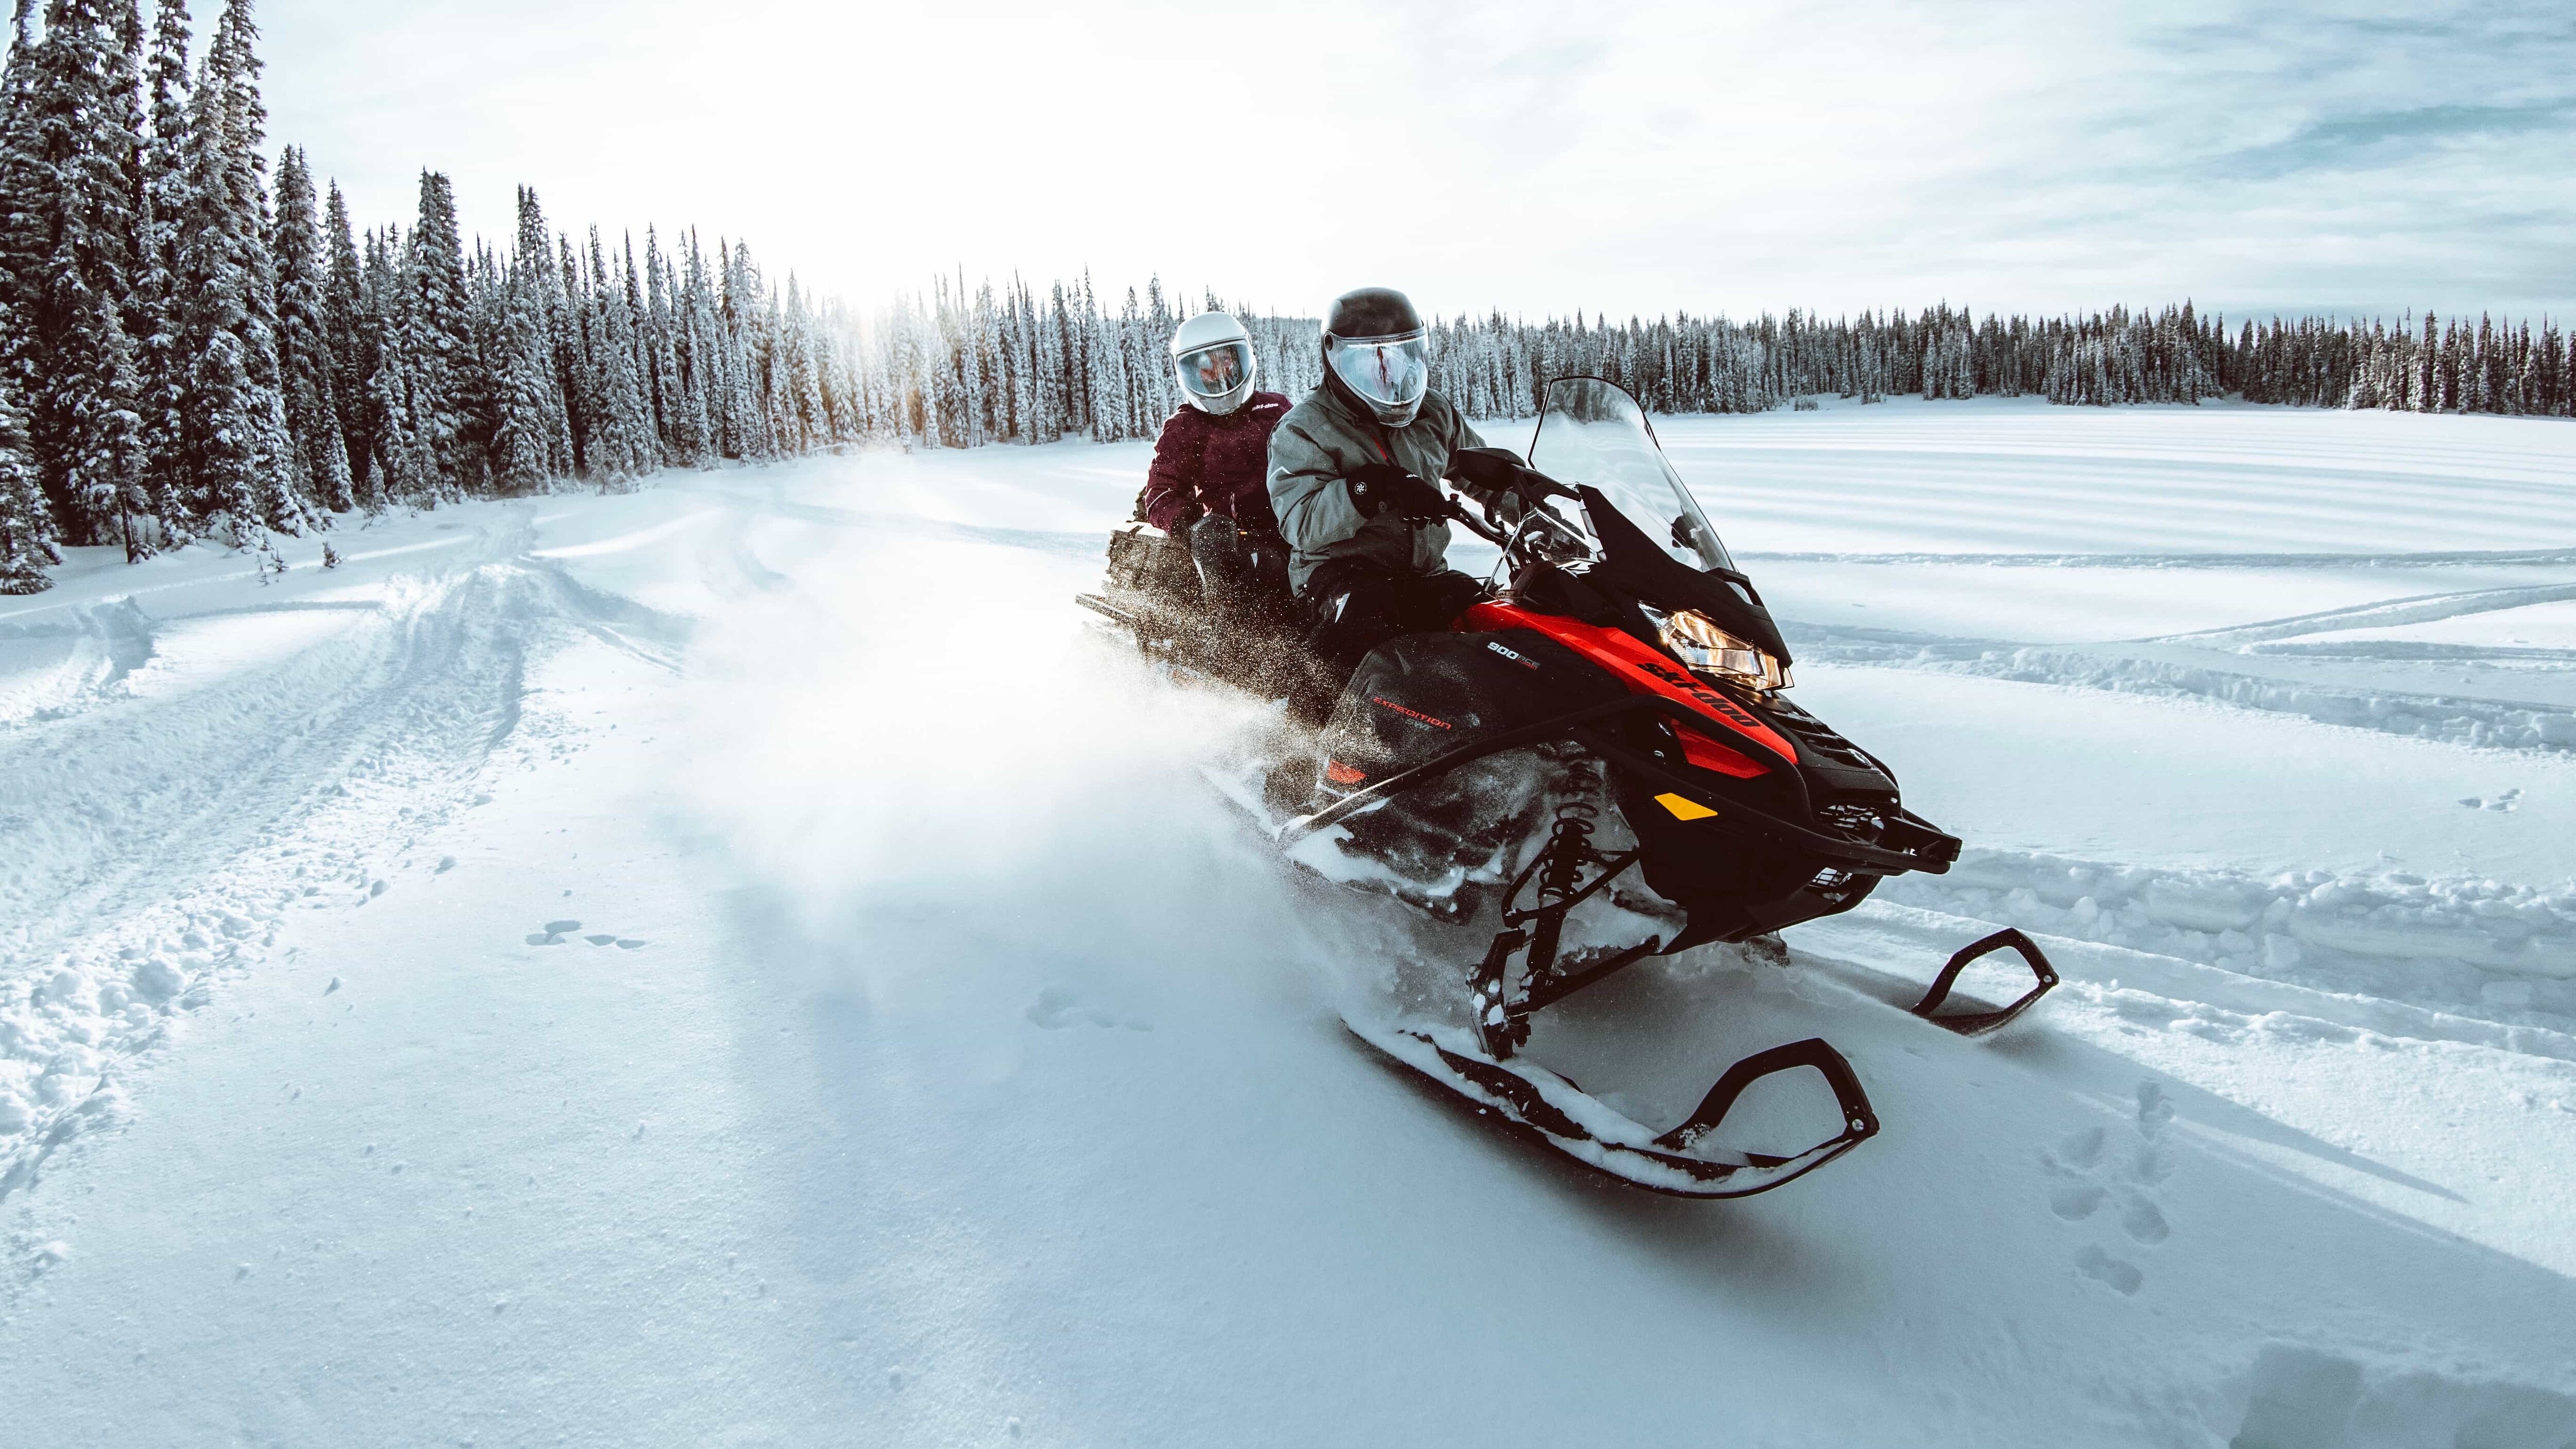 A group of people riding snowmobiles